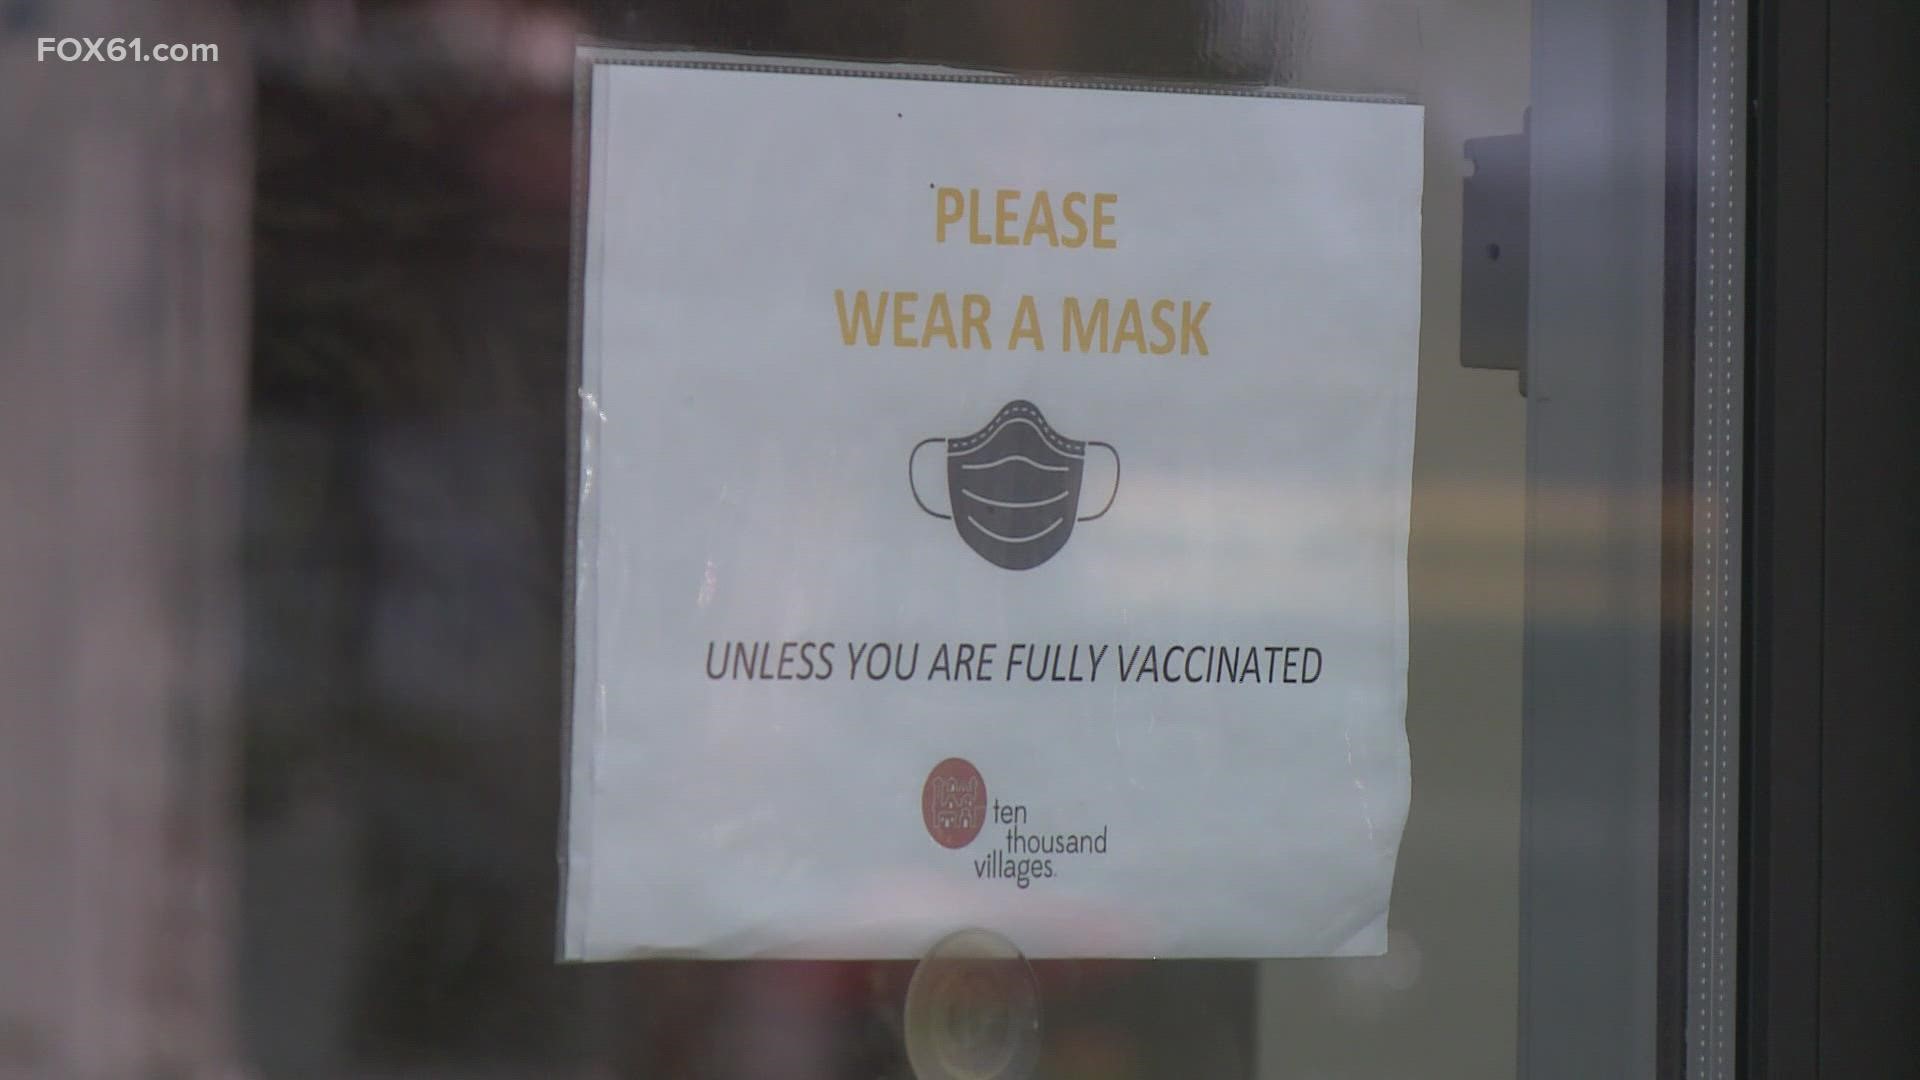 "We hope that people will understand they have to be vaccinated," said Teri Osborne, manager of Ten Thousand Villages.